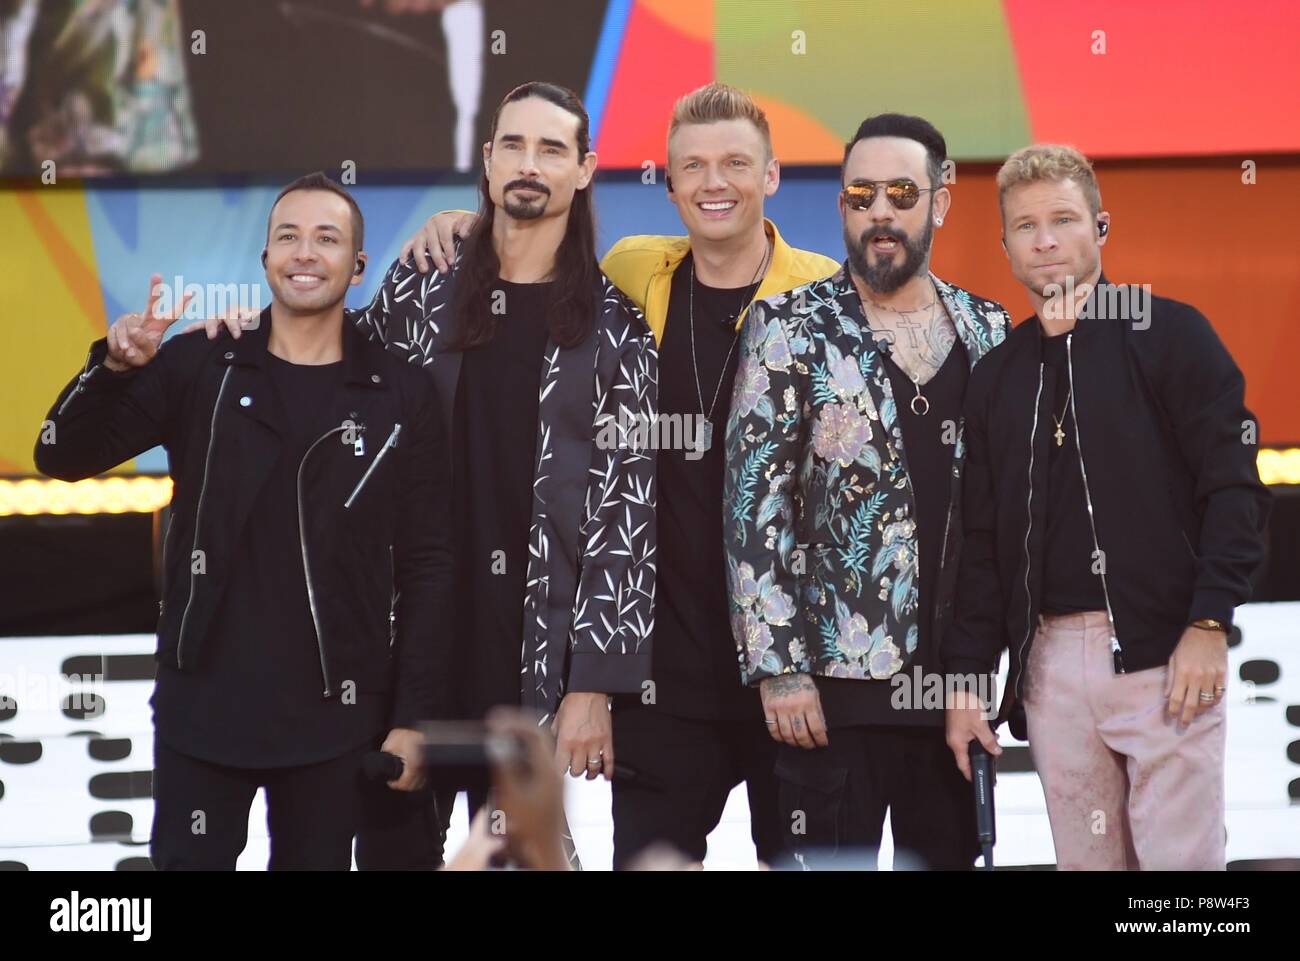 New York, NY, USA. 13th July, 2018. Howie D., Kevin Richardson, Nick Carter, A. J. McLean, Brian Littrell, Backstreet Boys on stage for Good Morning America (GMA) Summer Concert Series with The Backstreet Boys, Rumsey Playfield in Central Park, New York, NY July 13, 2018. Credit: Kristin Callahan/Everett Collection/Alamy Live News Stock Photo